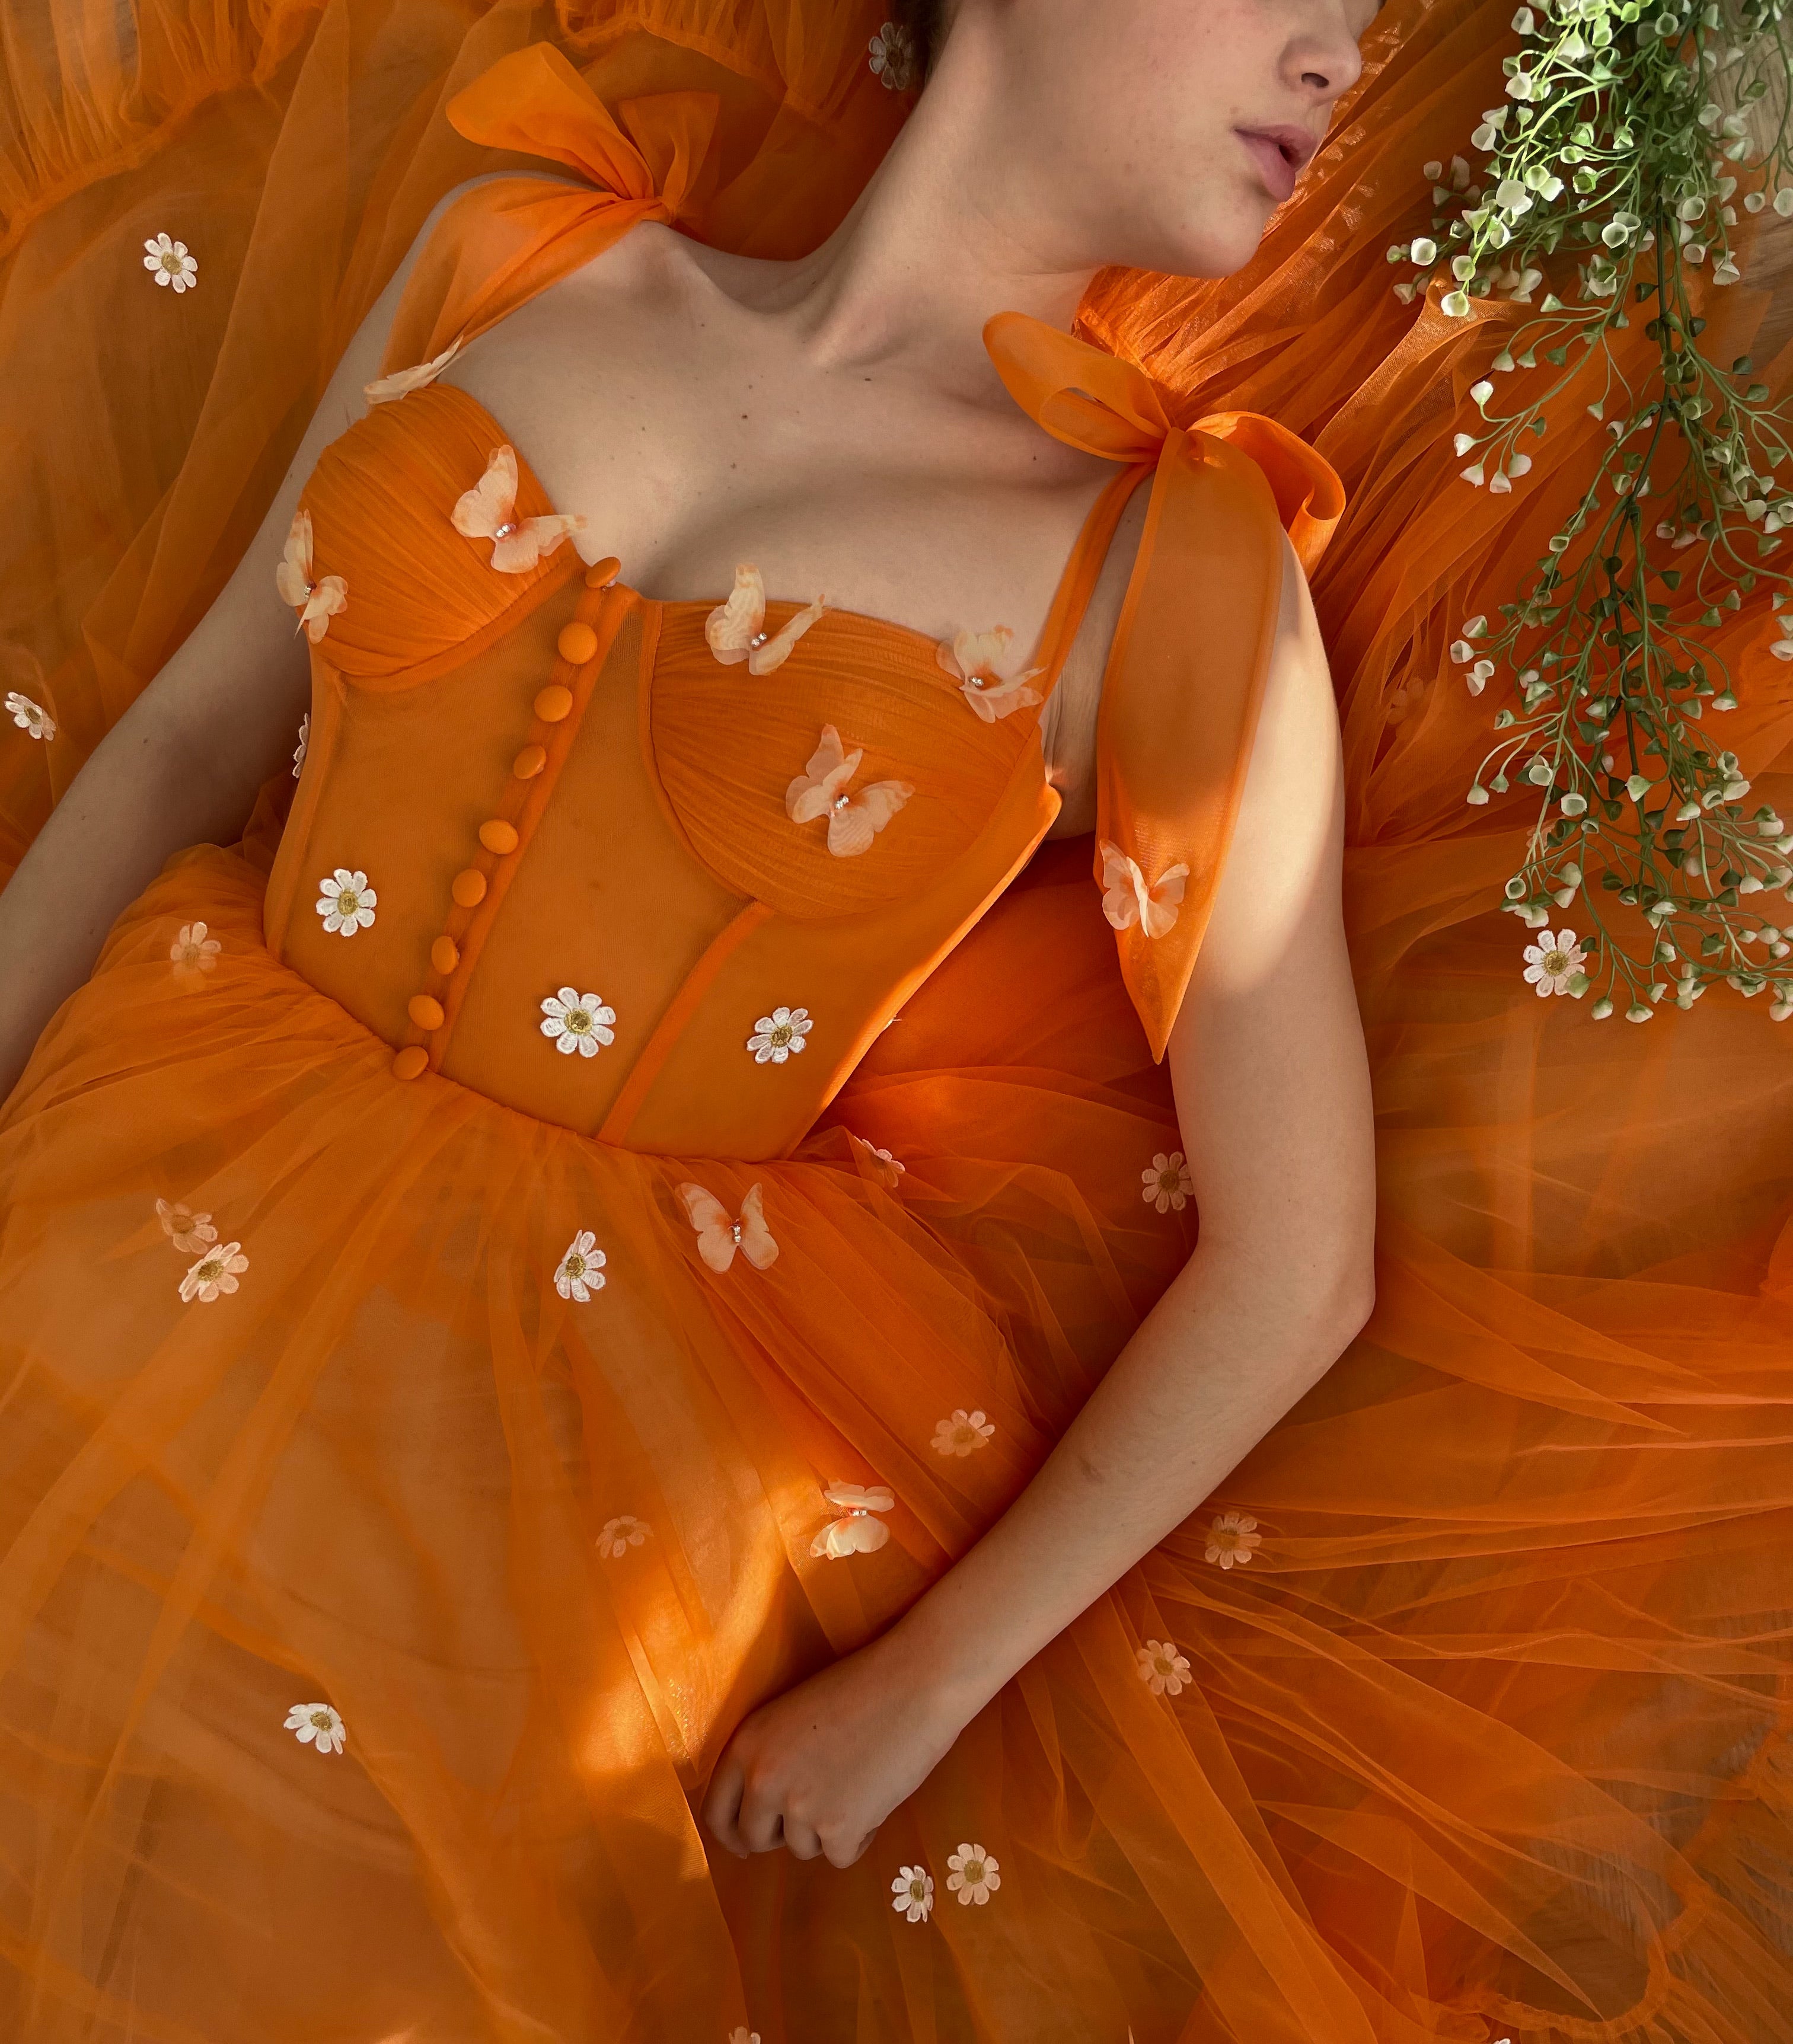 Orange midi dress with bow straps and embroidered daisies and butterflies